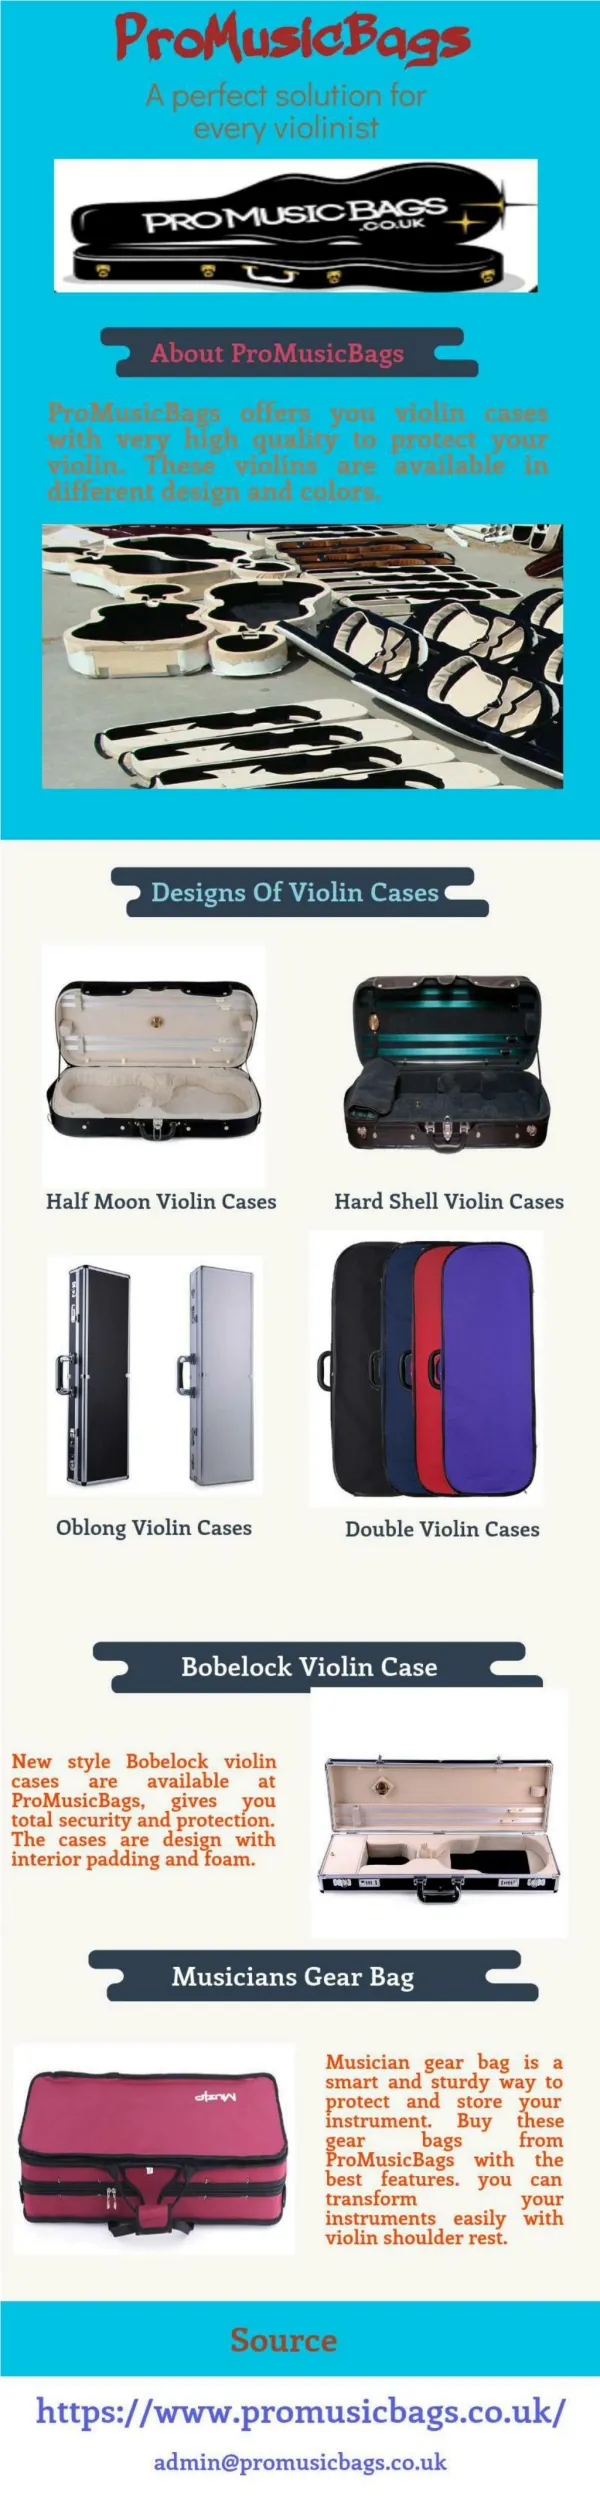 Musician Gear Bags and Bobelock Violin Case From ProMusicBags